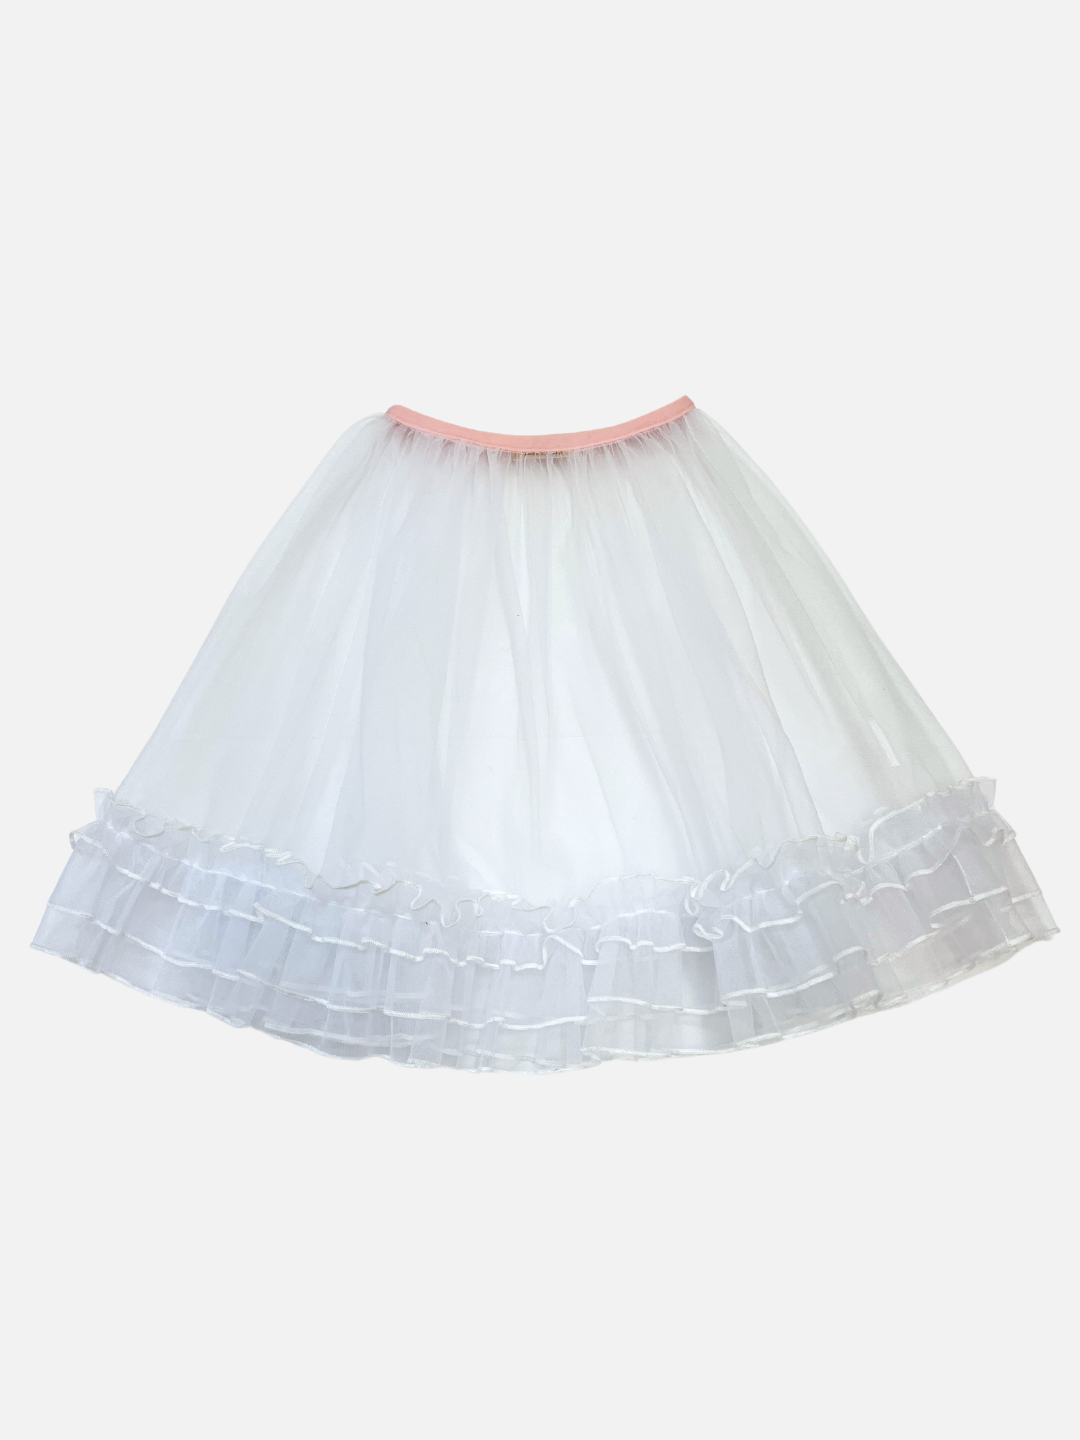 A front view of the kid's tulle layer skirt, white with a pink waistband